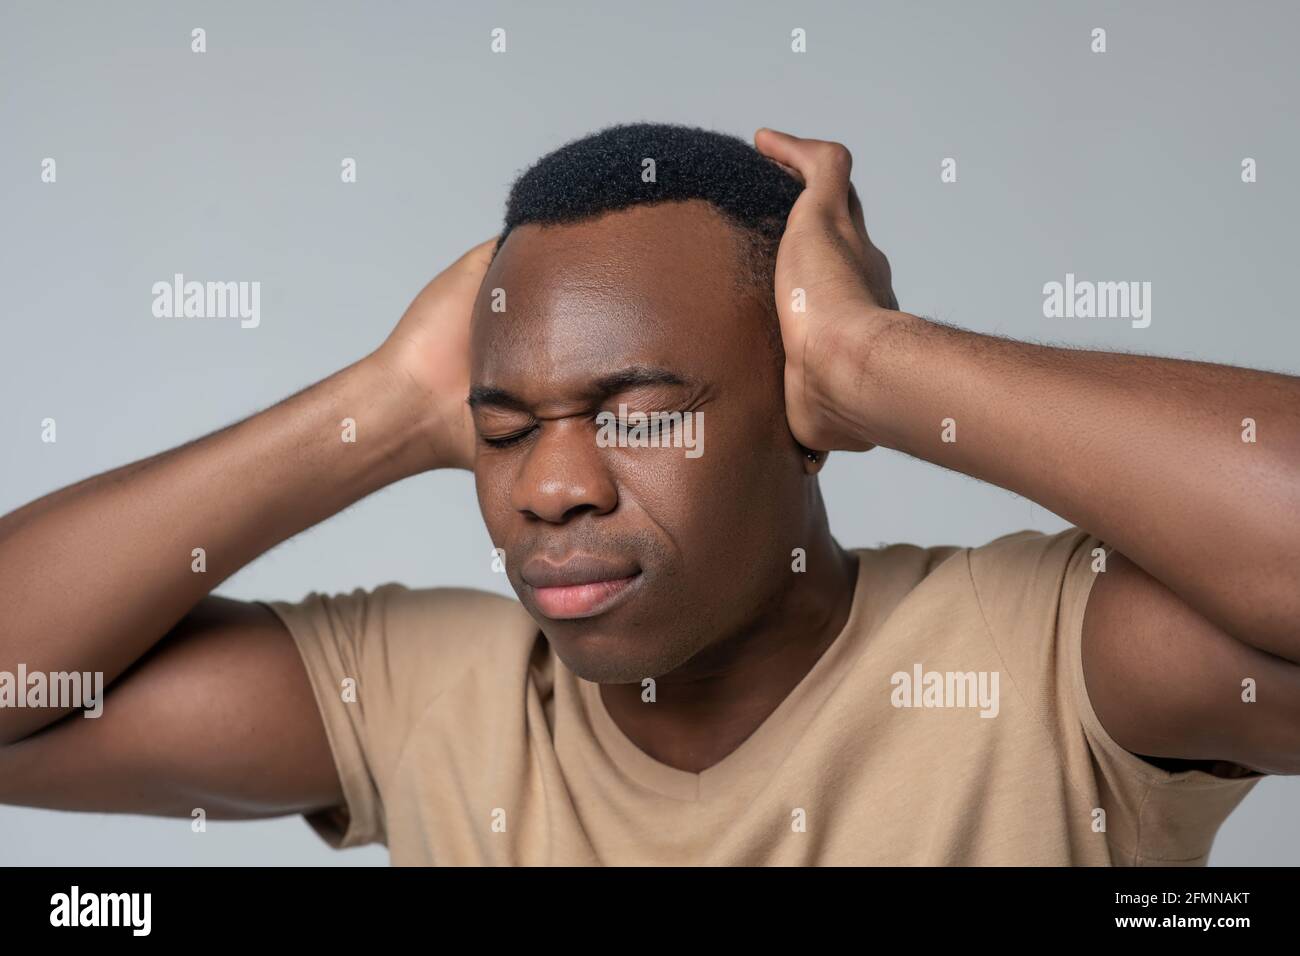 Close-up photo of man covering ears with hands Stock Photo